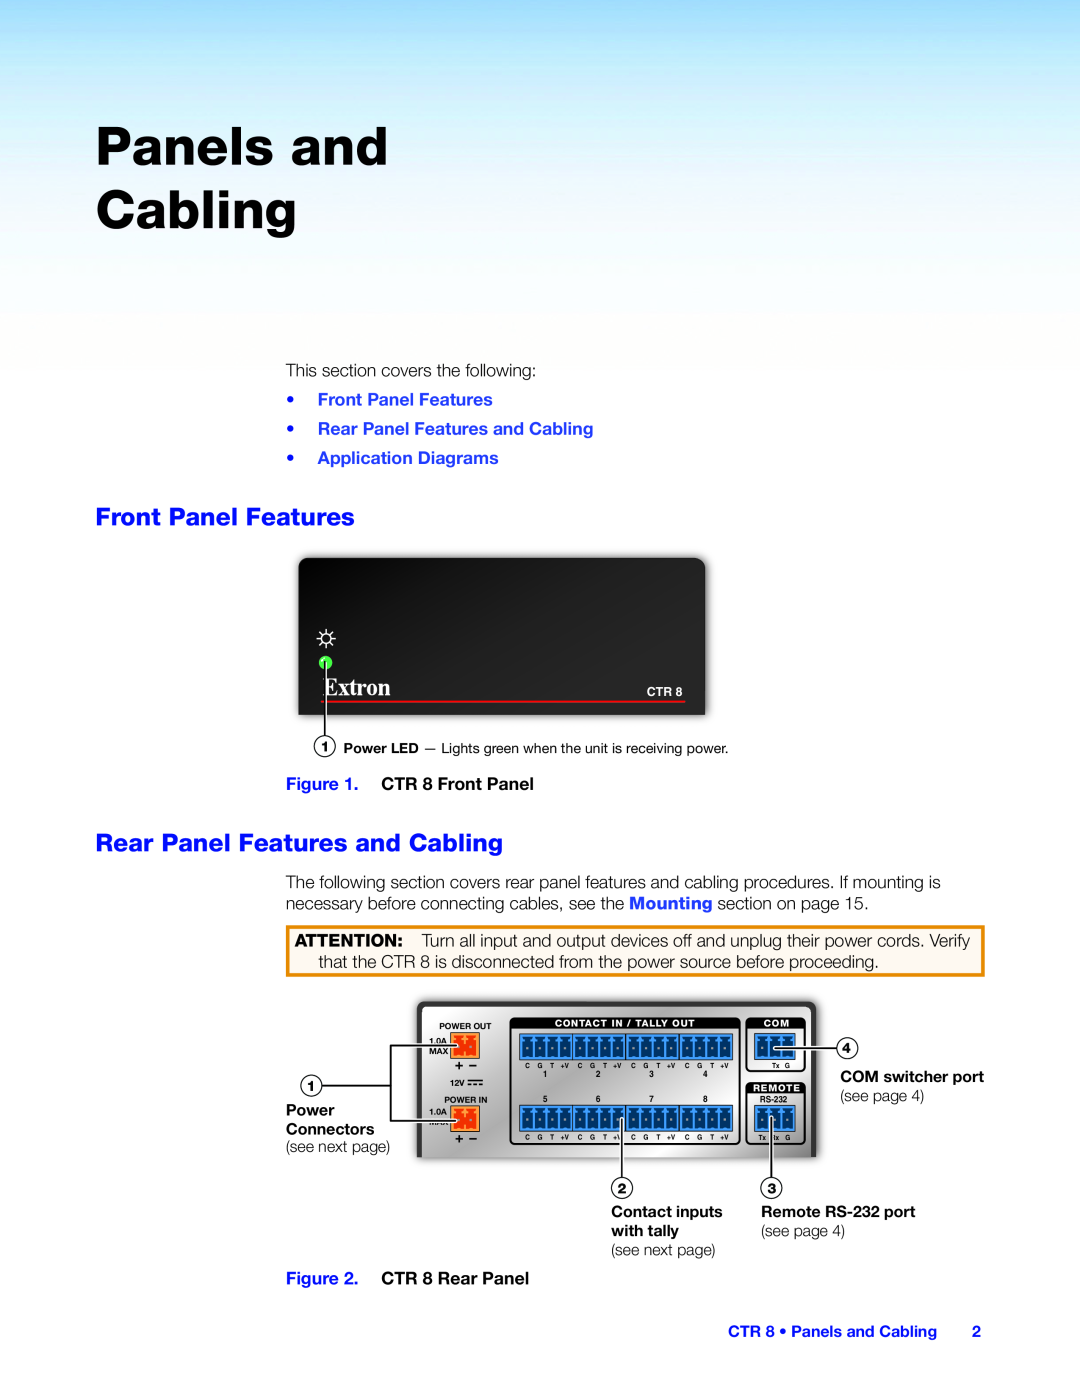 Extron electronic CTR 8 Panels and Cabling, Front Panel Features, Rear Panel Features and Cabling, Application Diagrams 